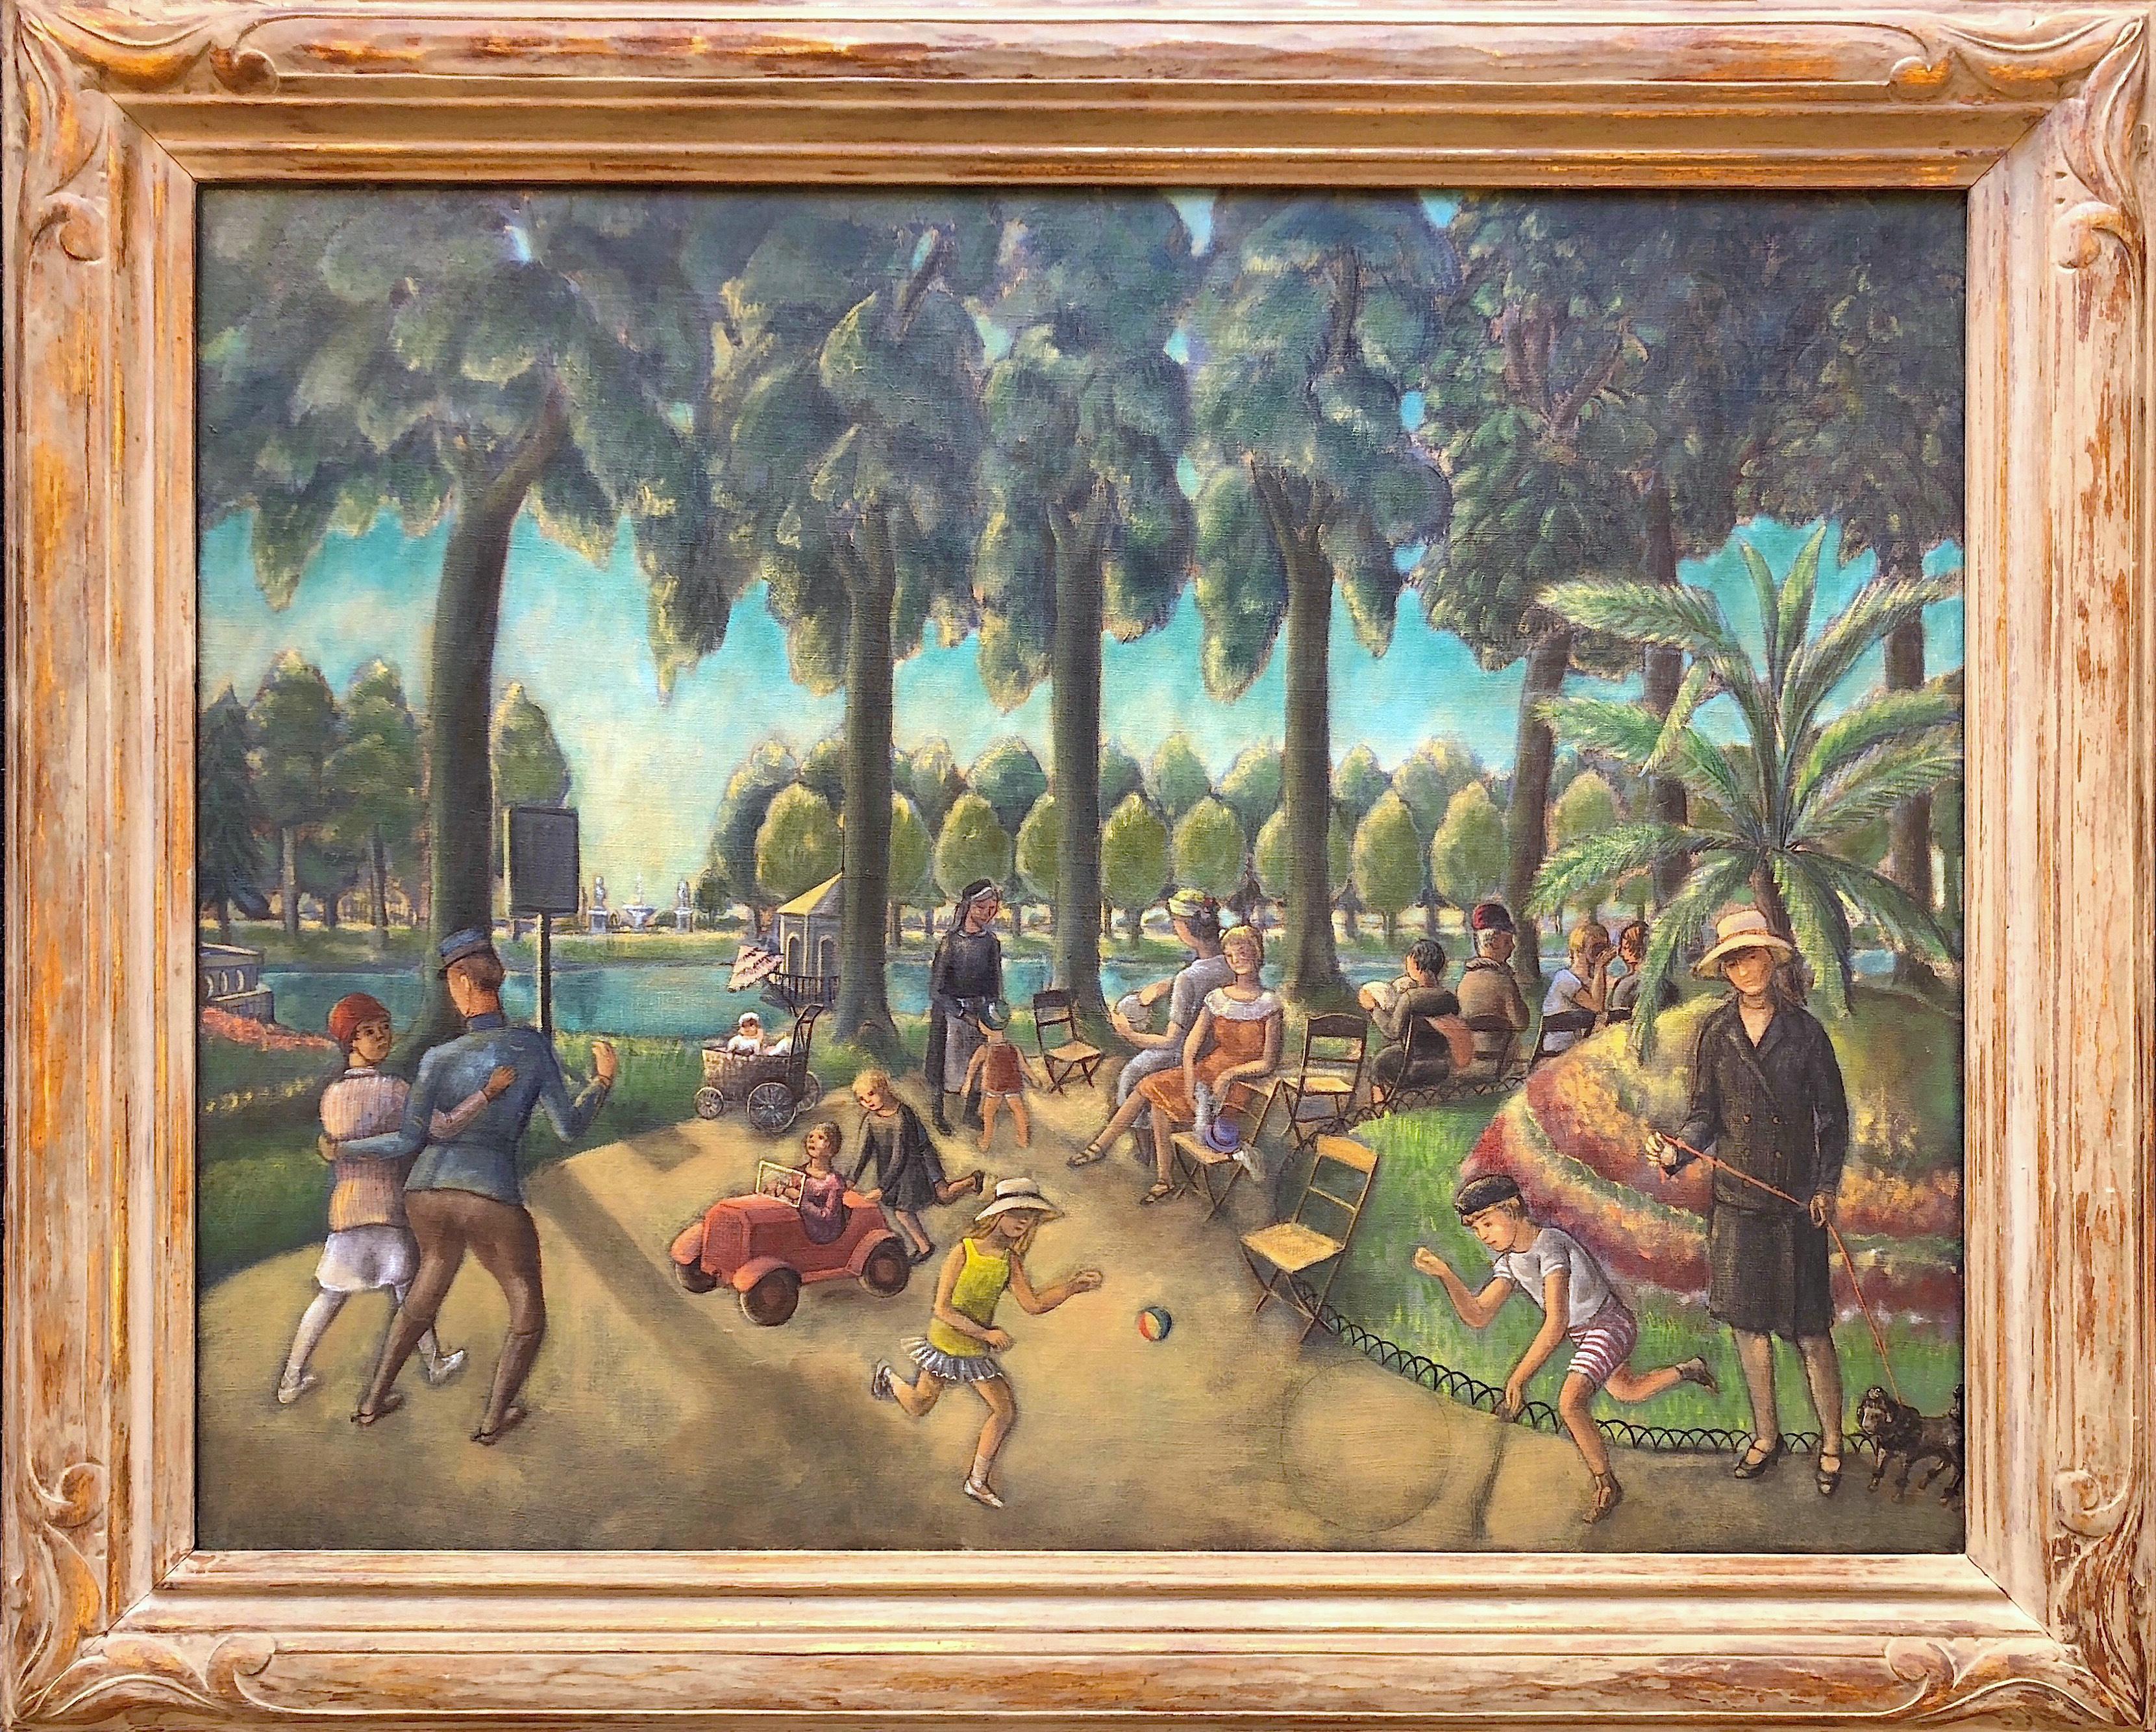 Charming early 20th century Parisian oil painting by William Charles Palmer. 

English Garden in Fontainebleau (1927)
Oil on canvas
27 ½" x 35 ½"
32 ½" x 42 ½" x 2 ¾" framed

Inscribed verso (under lining) "English Garden in Fontainebleau W.C.P.